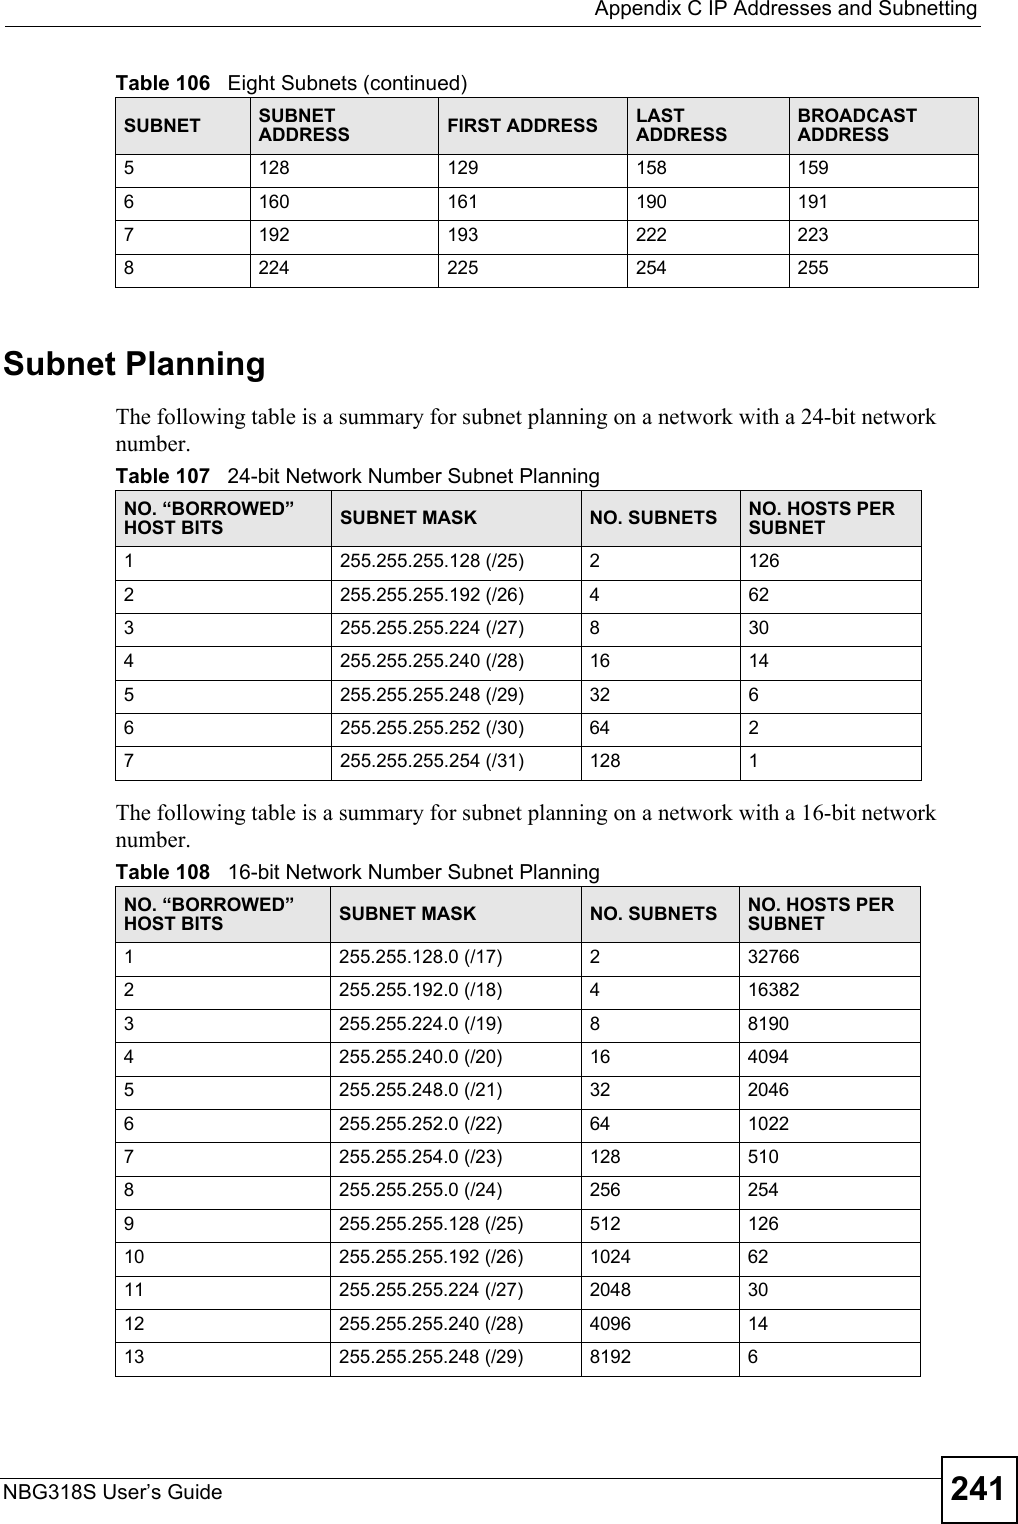  Appendix C IP Addresses and SubnettingNBG318S User’s Guide 241Subnet PlanningThe following table is a summary for subnet planning on a network with a 24-bit network number.The following table is a summary for subnet planning on a network with a 16-bit network number. 5128 129 158 1596160 161 190 1917192 193 222 2238224 225 254 255Table 106   Eight Subnets (continued)SUBNET SUBNET ADDRESS FIRST ADDRESS LAST ADDRESSBROADCAST ADDRESSTable 107   24-bit Network Number Subnet PlanningNO. “BORROWED” HOST BITS SUBNET MASK NO. SUBNETS NO. HOSTS PER SUBNET1255.255.255.128 (/25) 21262255.255.255.192 (/26) 4623255.255.255.224 (/27) 8304255.255.255.240 (/28) 16 145255.255.255.248 (/29) 32 66255.255.255.252 (/30) 64 27255.255.255.254 (/31) 128 1Table 108   16-bit Network Number Subnet PlanningNO. “BORROWED” HOST BITS SUBNET MASK NO. SUBNETS NO. HOSTS PER SUBNET1255.255.128.0 (/17) 2327662255.255.192.0 (/18) 4163823255.255.224.0 (/19) 881904255.255.240.0 (/20) 16 40945255.255.248.0 (/21) 32 20466255.255.252.0 (/22) 64 10227255.255.254.0 (/23) 128 5108255.255.255.0 (/24) 256 2549255.255.255.128 (/25) 512 12610 255.255.255.192 (/26) 1024 6211 255.255.255.224 (/27) 2048 3012 255.255.255.240 (/28) 4096 1413 255.255.255.248 (/29) 8192 6